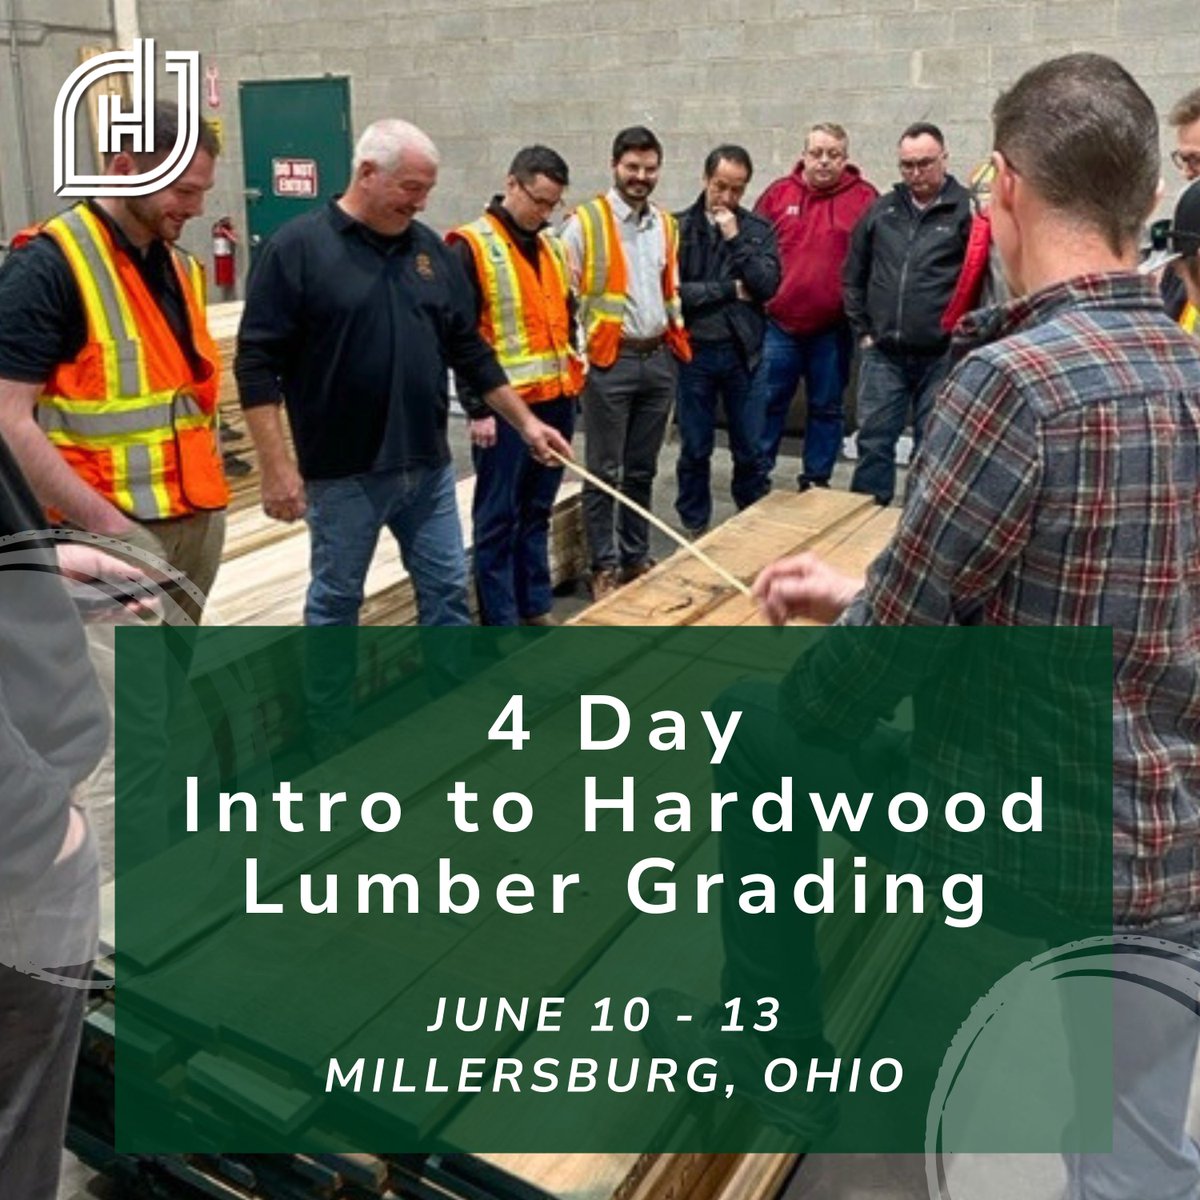 Join us June 10-13 in Millersburg, Ohio for a 4-day Introduction to Grading Hardwood Lumber! Led by National Inspector Mark Depp, this course is perfect for yardmen, sawyers, sales teams, and management. Register now before it's too late: members.nhla.com/eweb/DynamicPa…